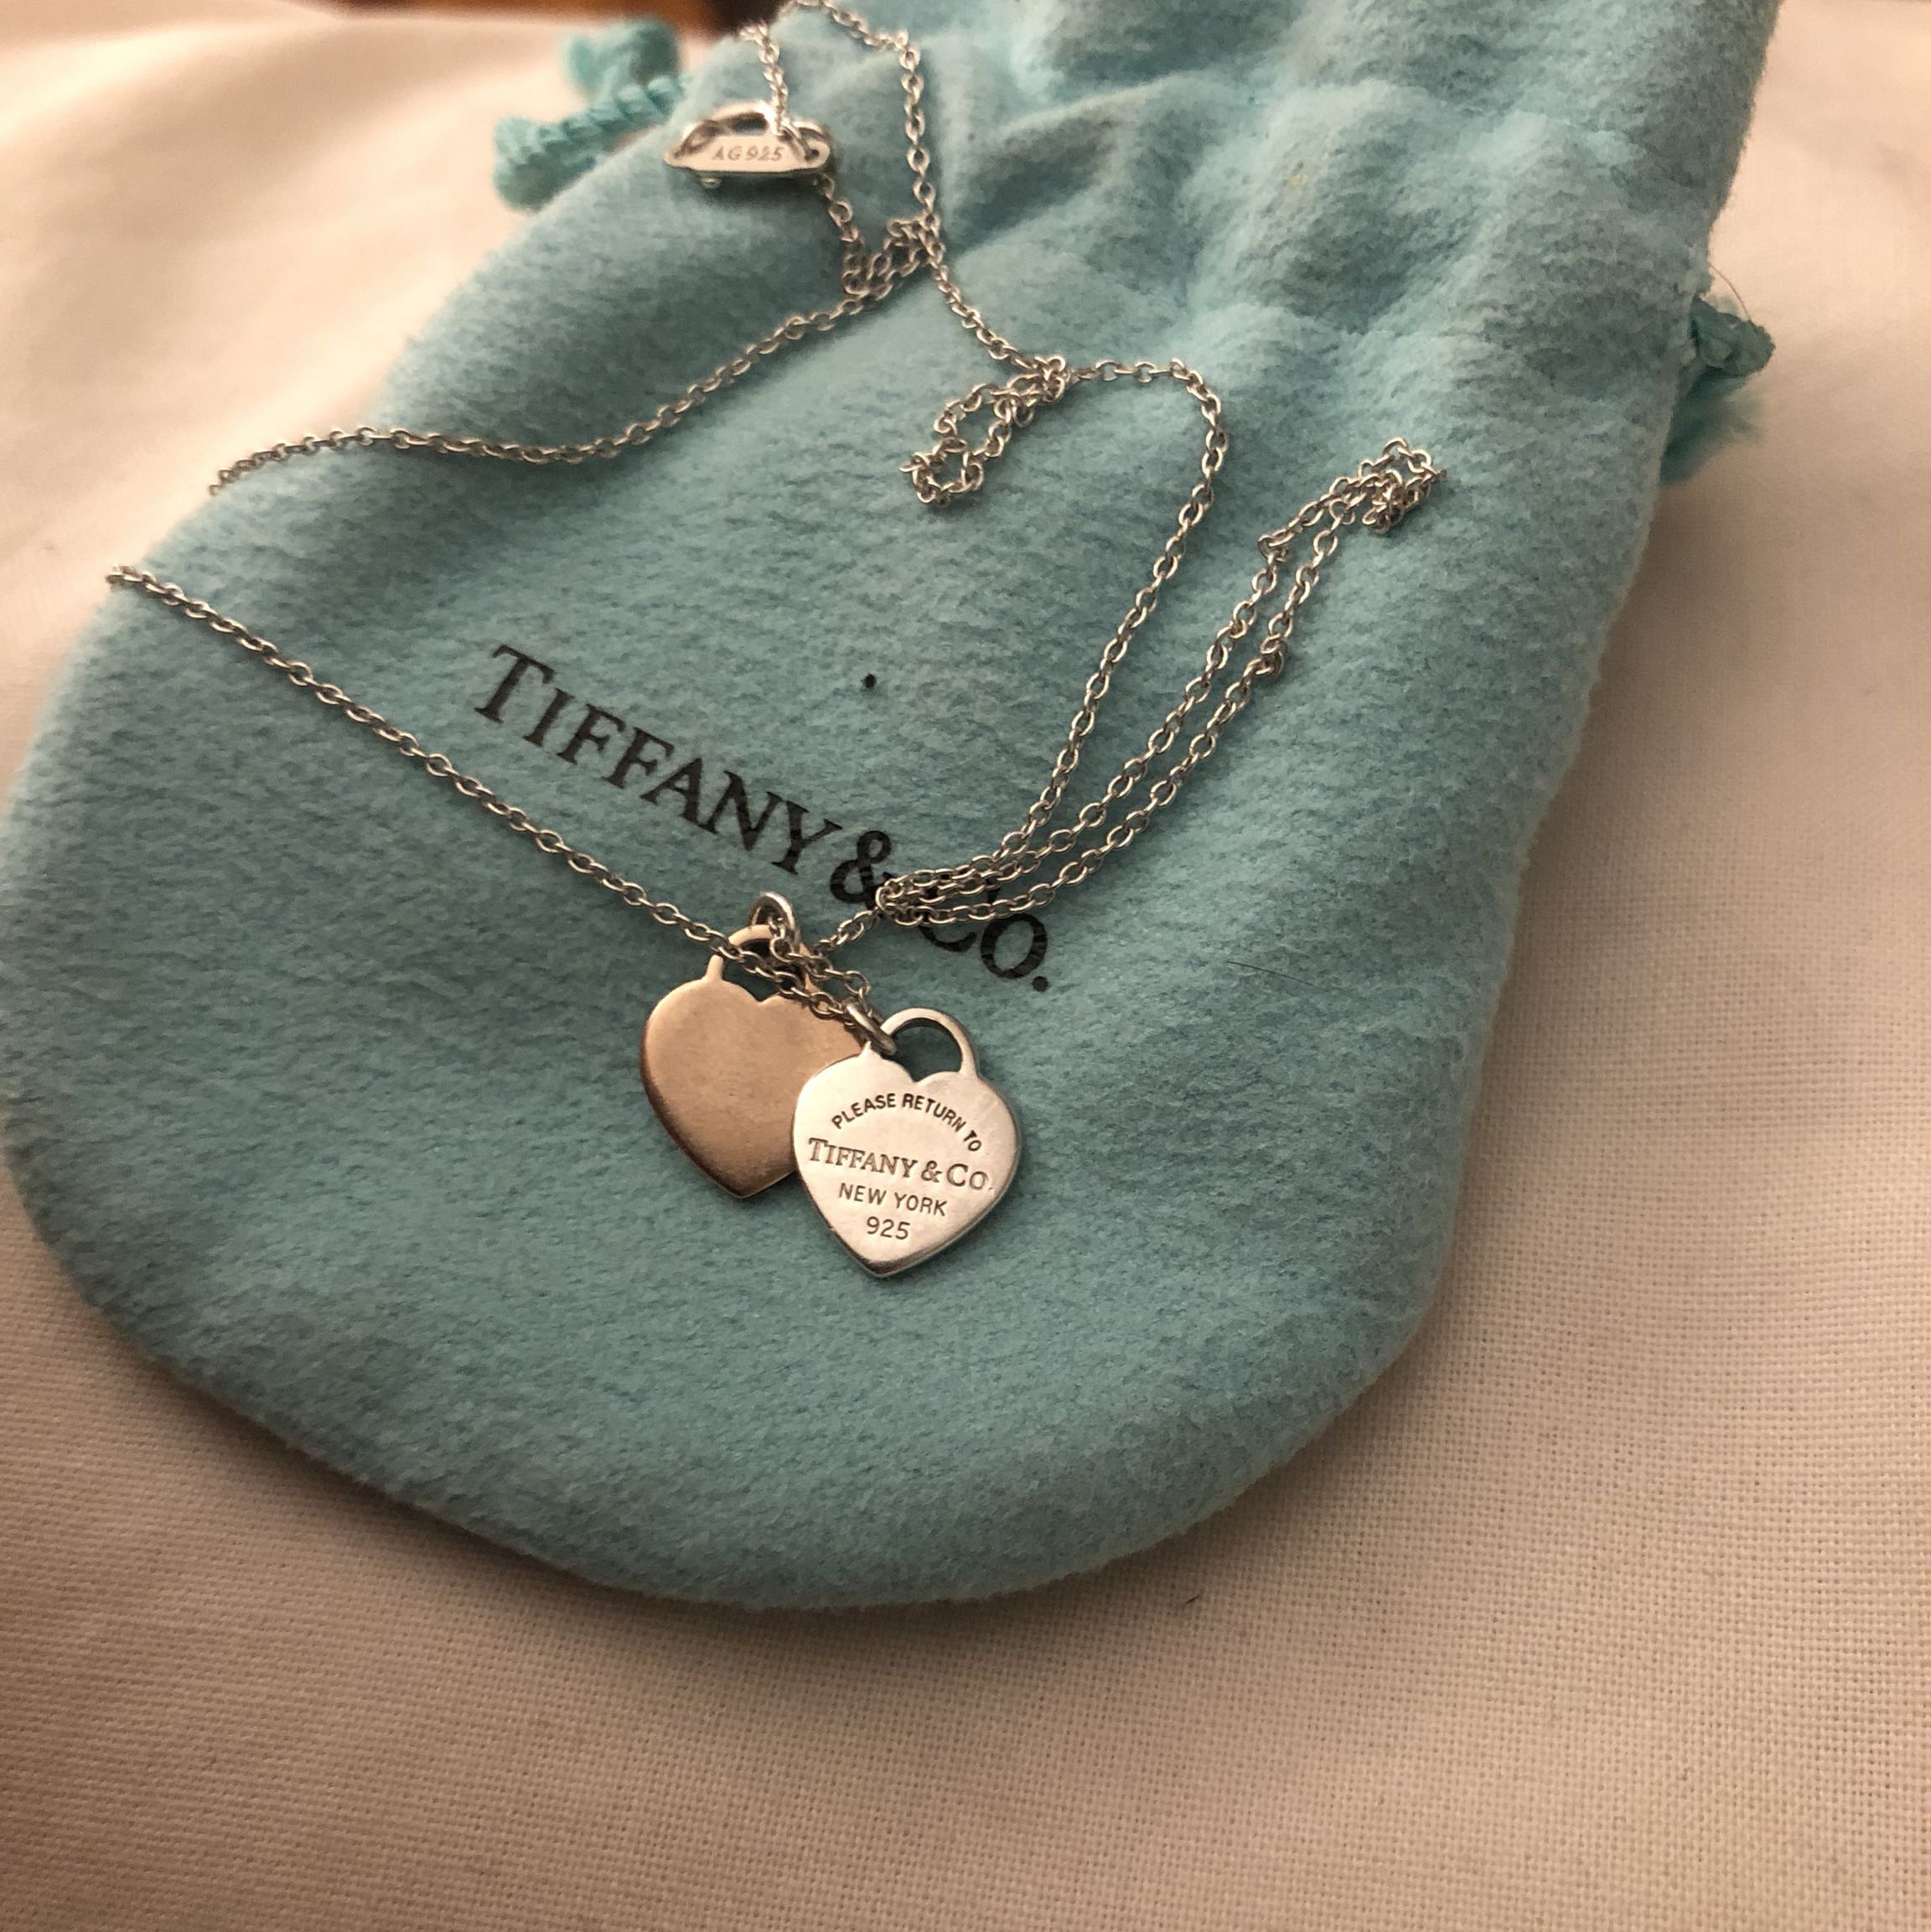 tiffany and co necklace prices